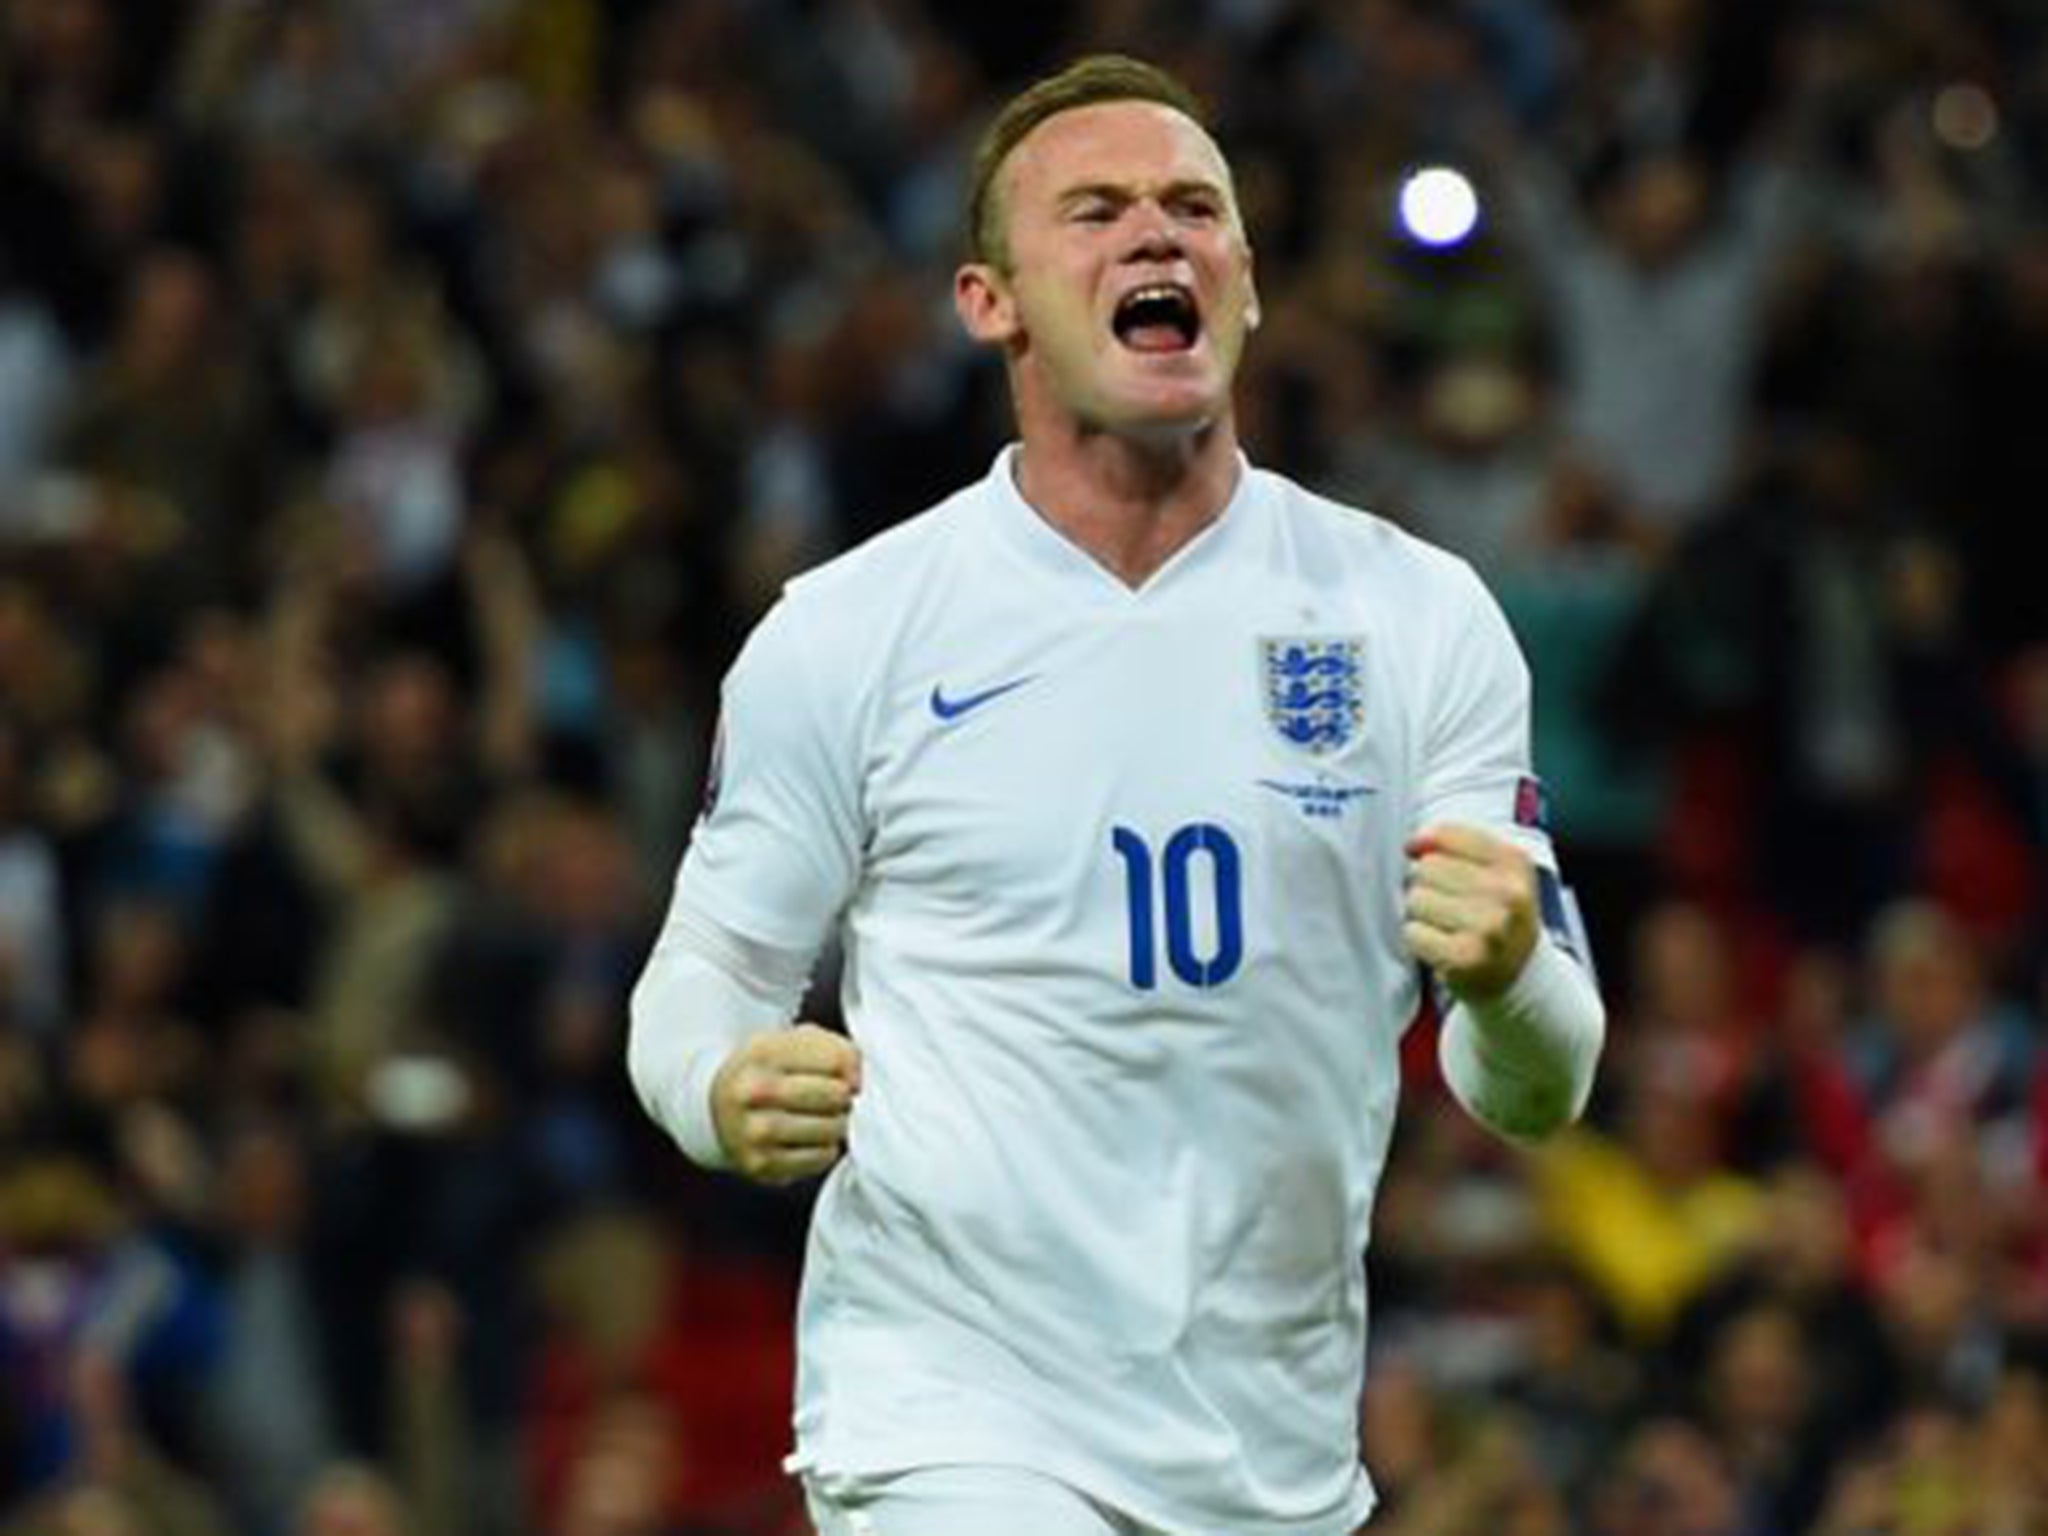 Wayne Rooney’s 50th international goal saw off a record held by Sir Bobby Charlton for more than 40 years